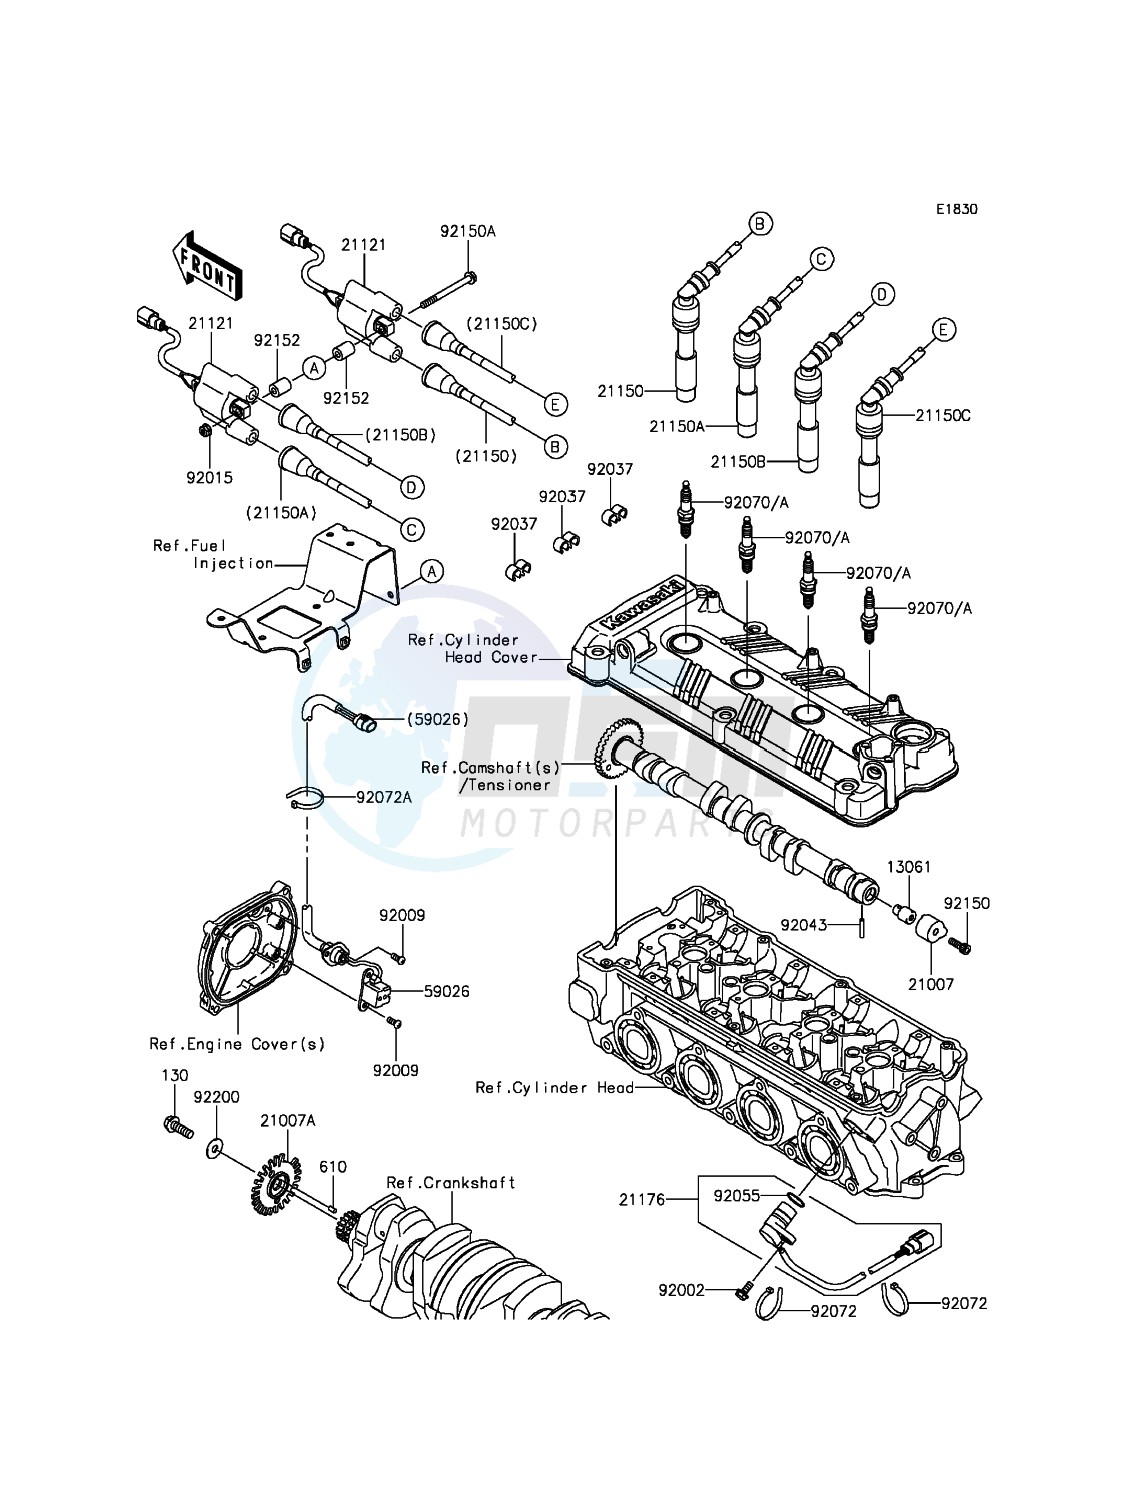 Ignition System image